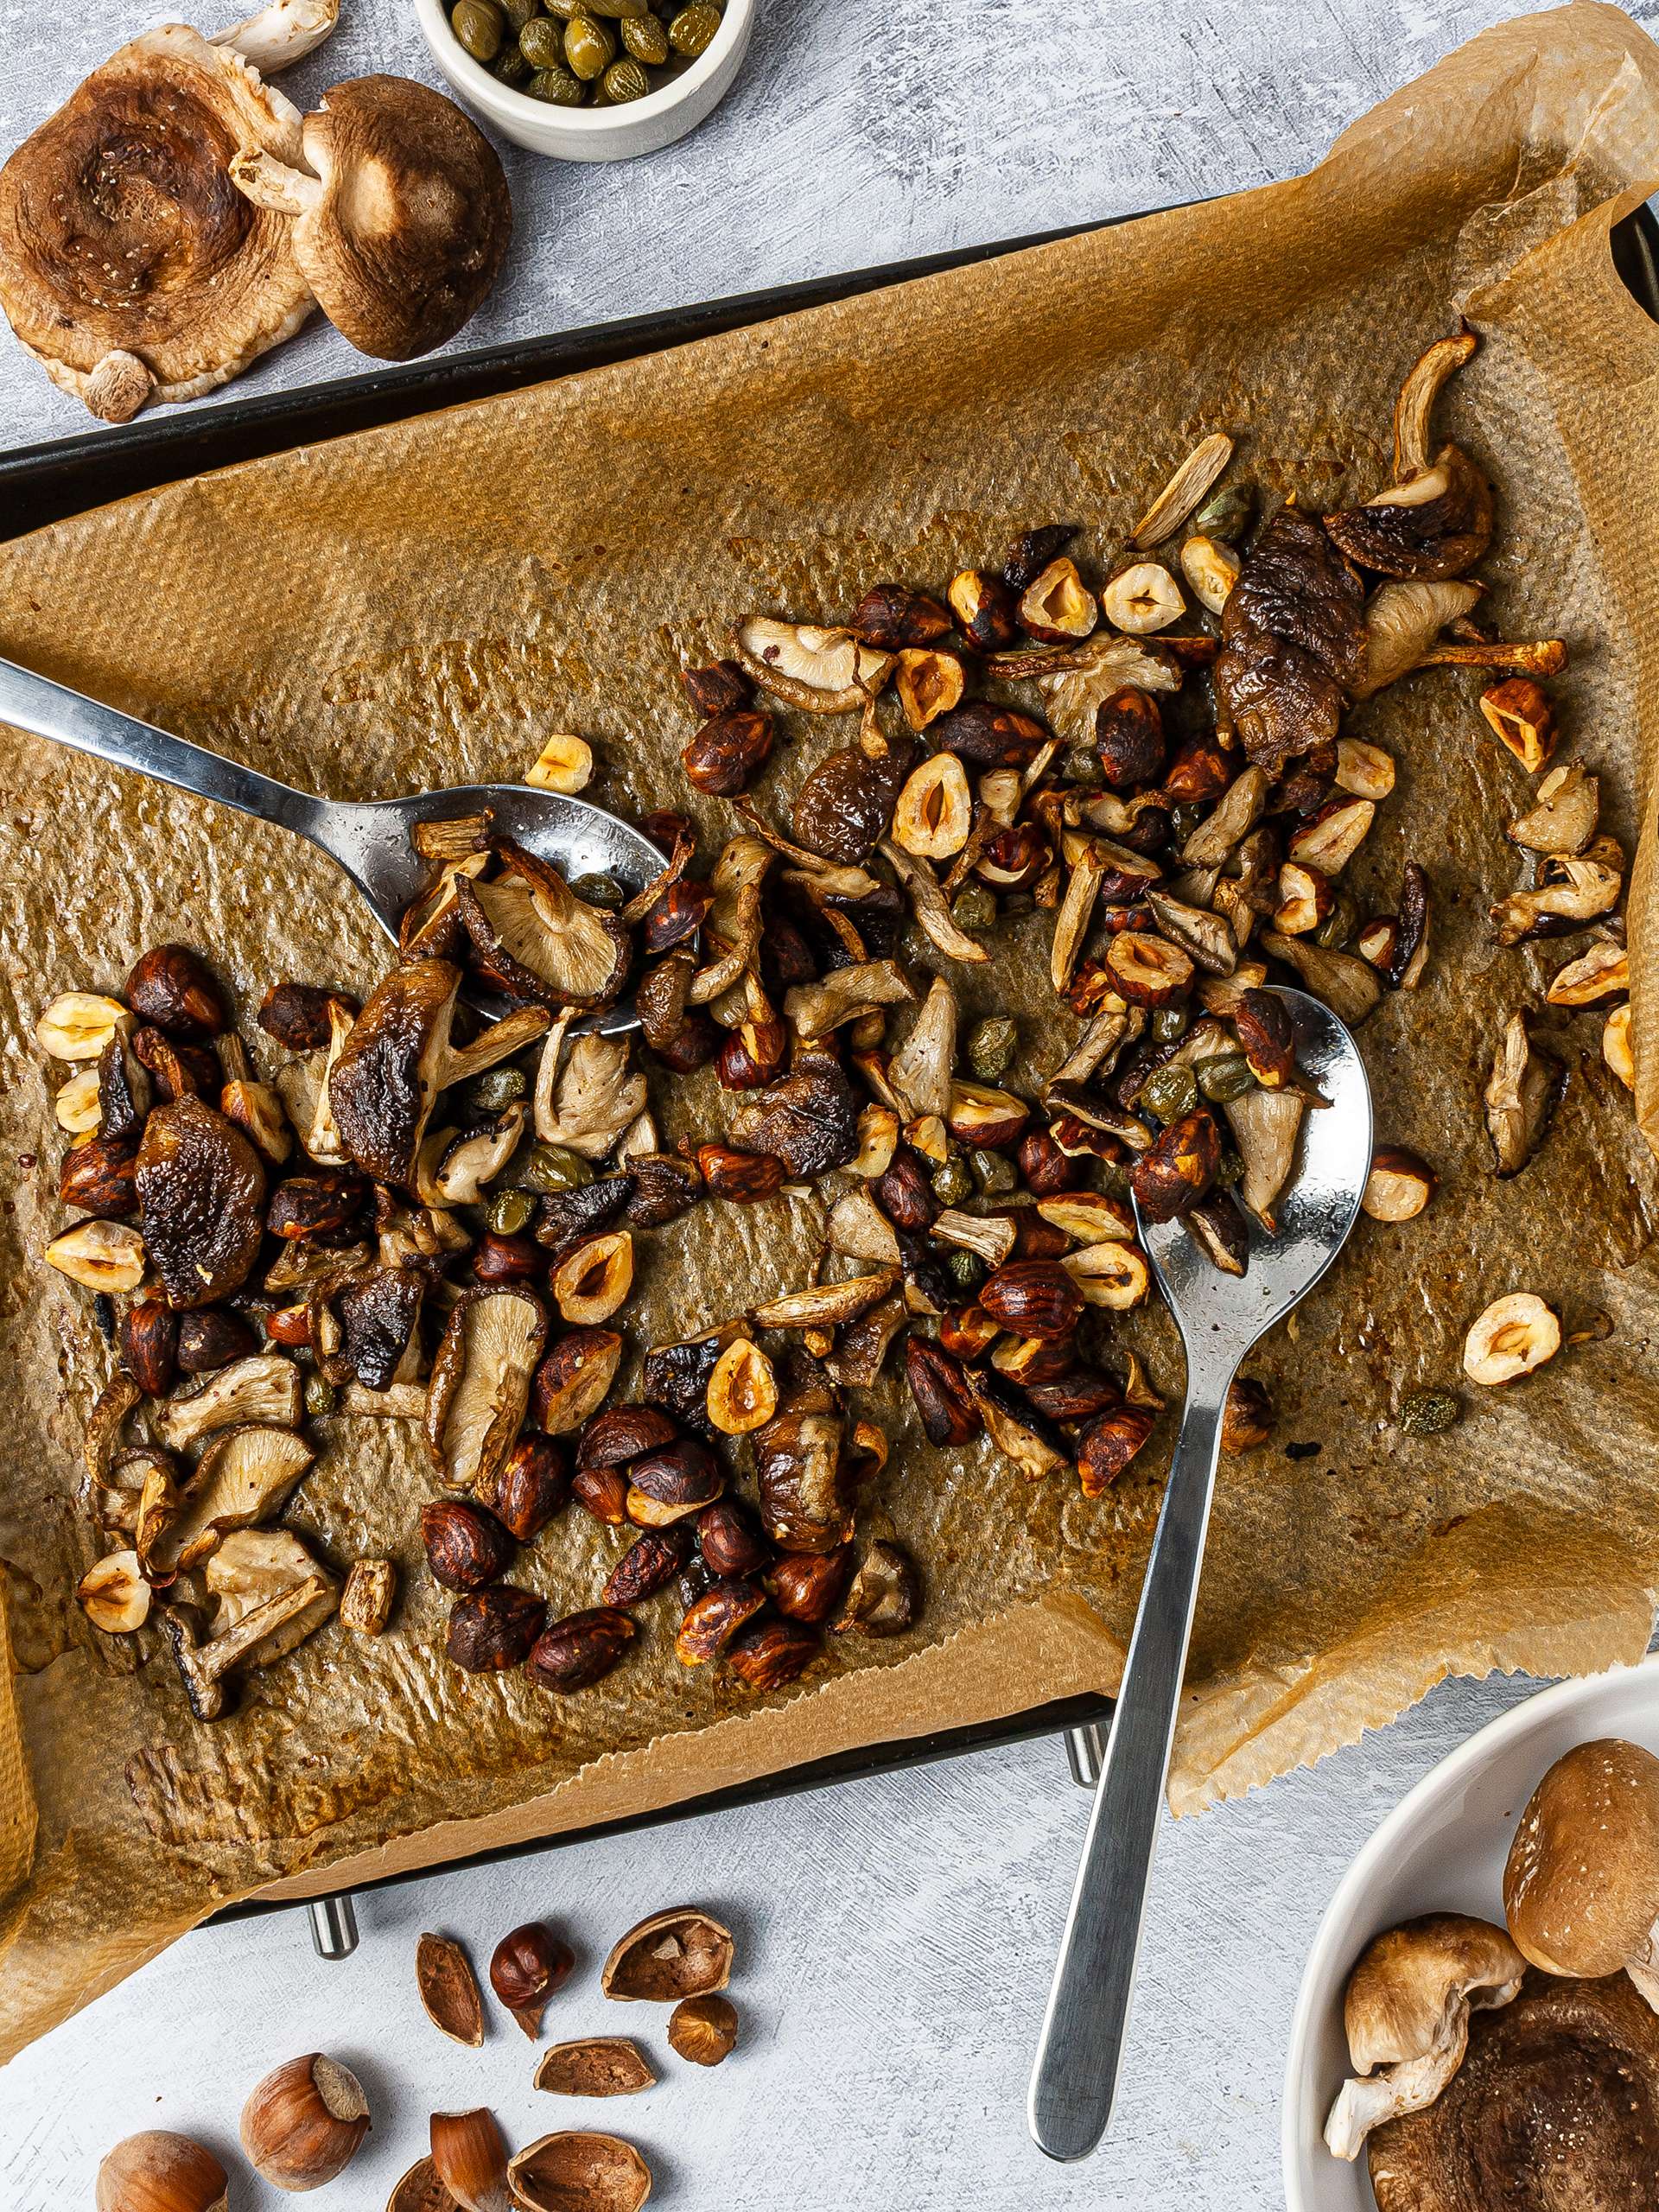 Roasted shiitake mushrooms with hazelnuts and capes over a baking tray